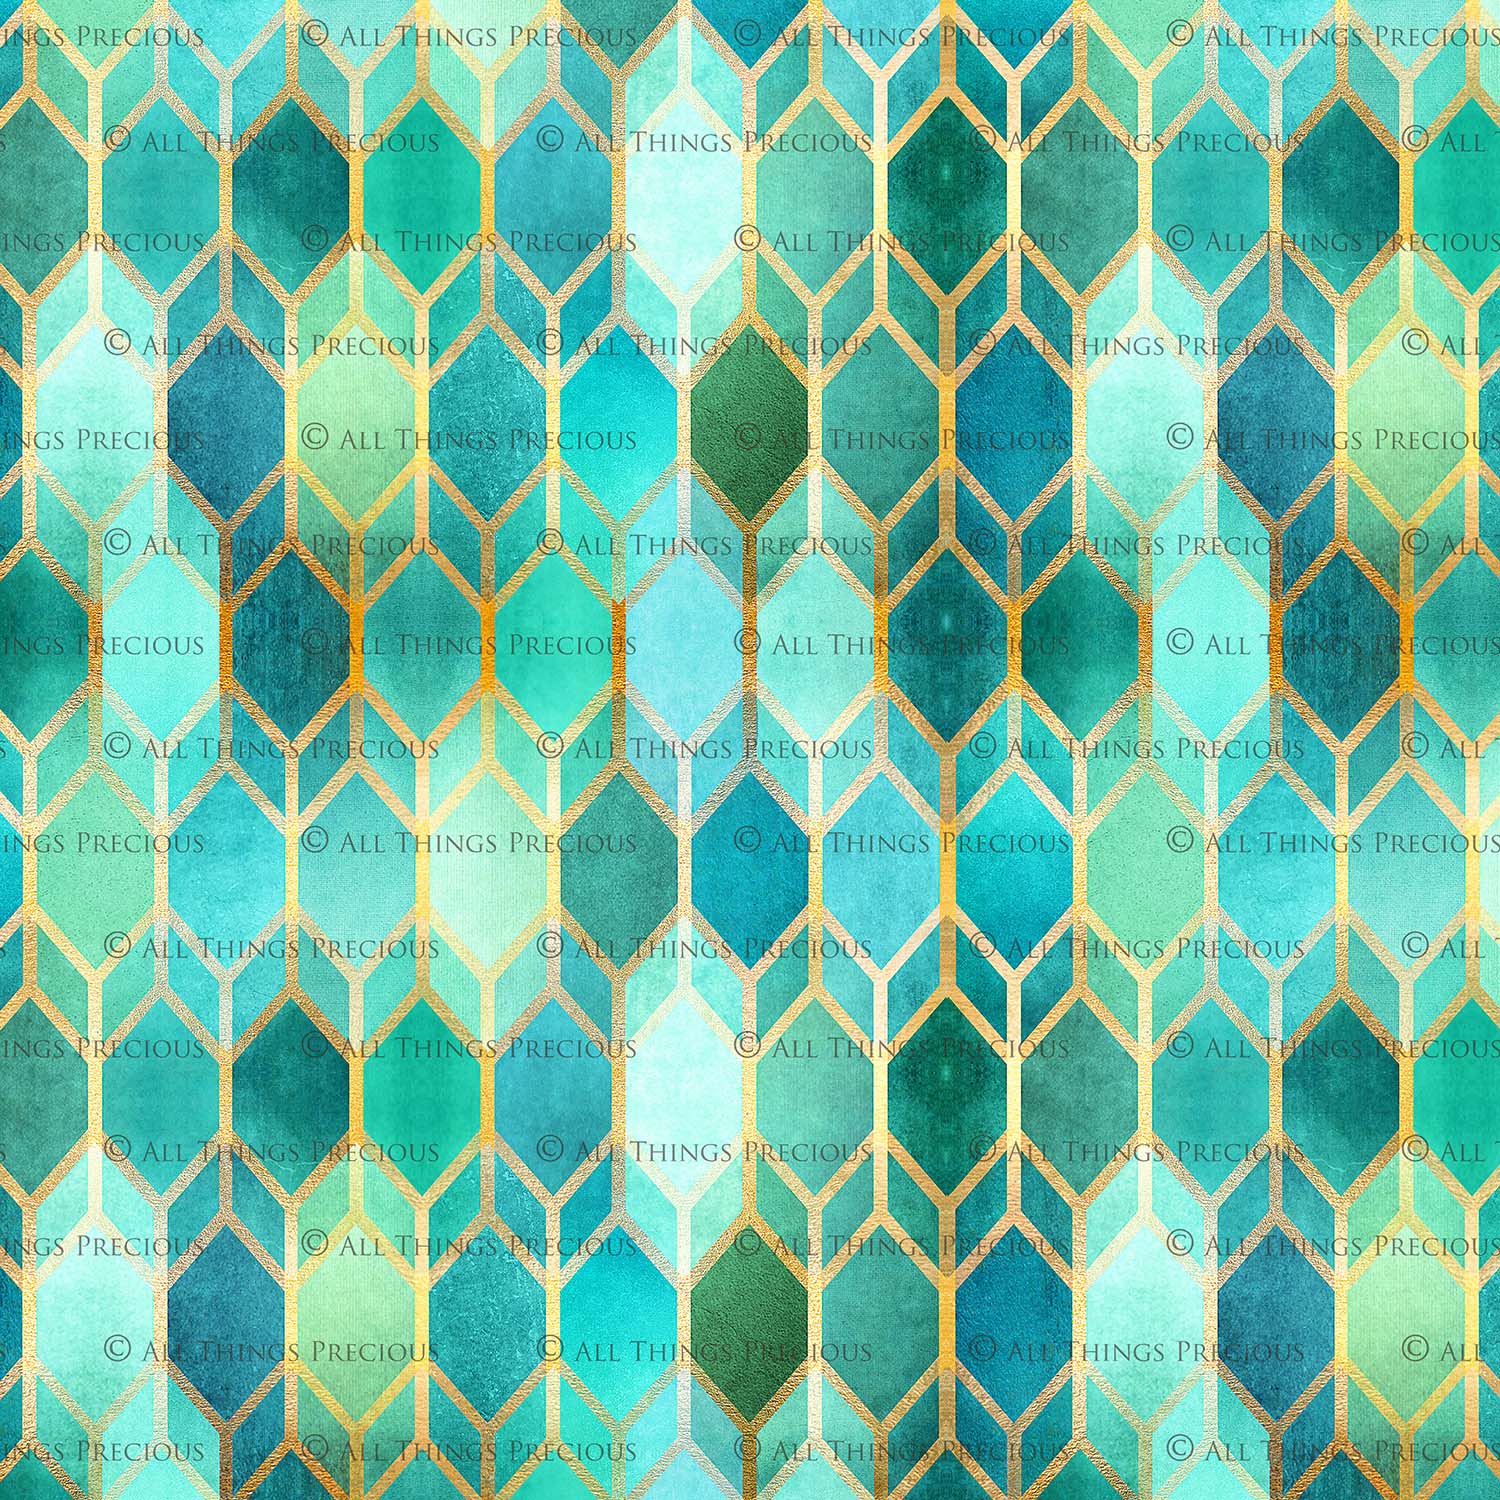 TEXTURED PATTERN Gold & Turquoise - Digital Papers